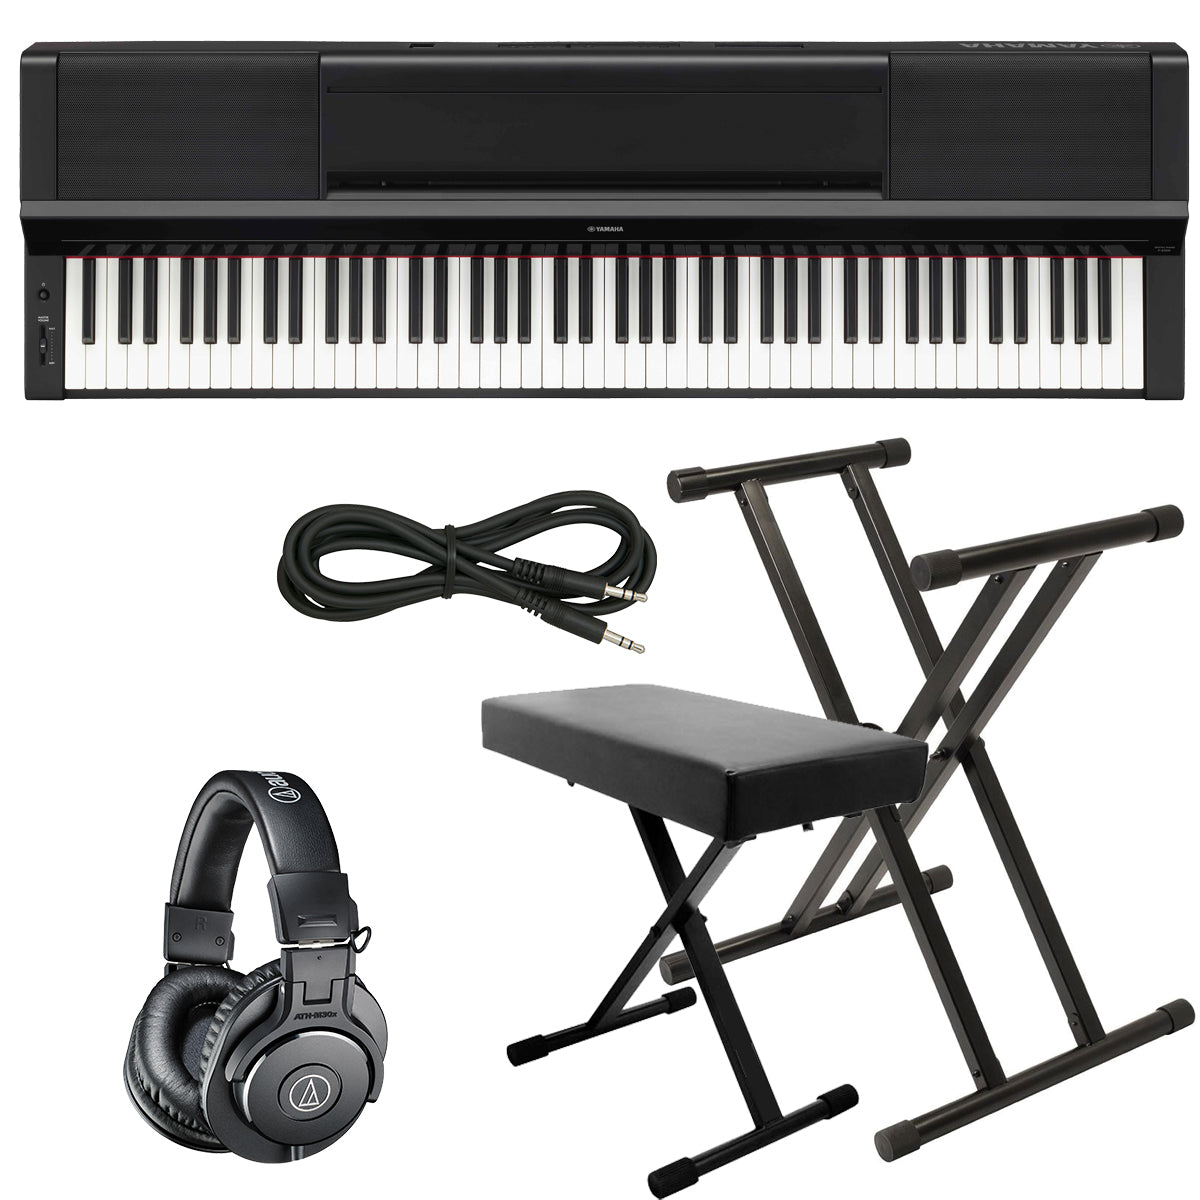 Collage of everything that is included with the Yamaha P-S500 Digital Piano - Black KEY ESSENTIALS BUNDLE